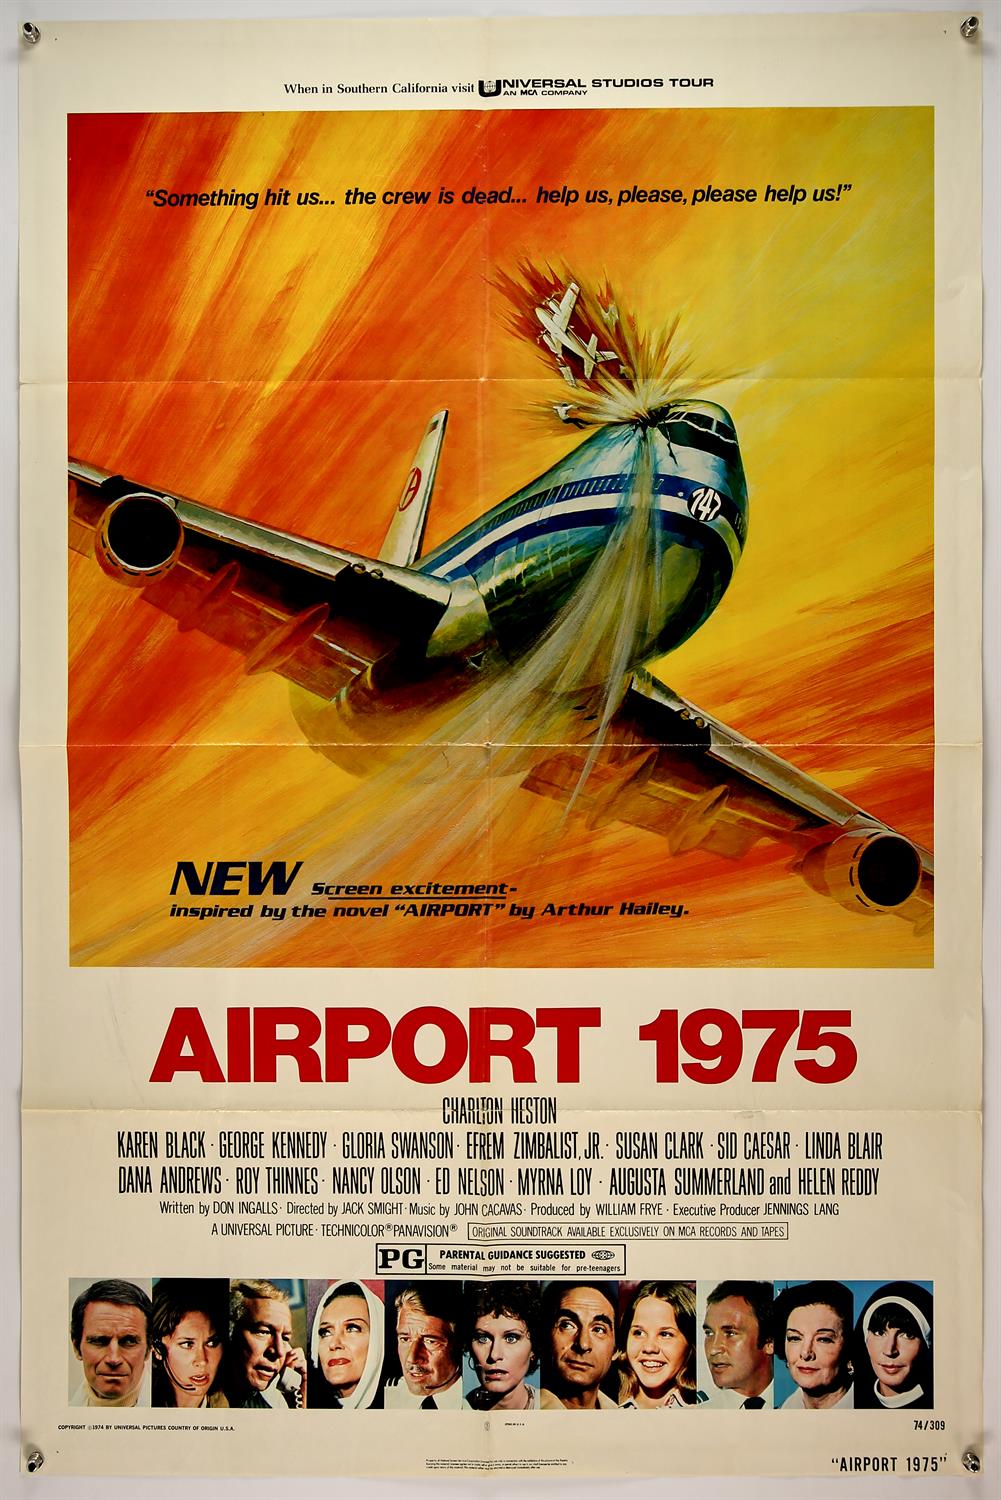 Airport 75 (1974), US One Sheet, 41 x 27 inches, NSS number 74/309, folded. Director Jack Smight